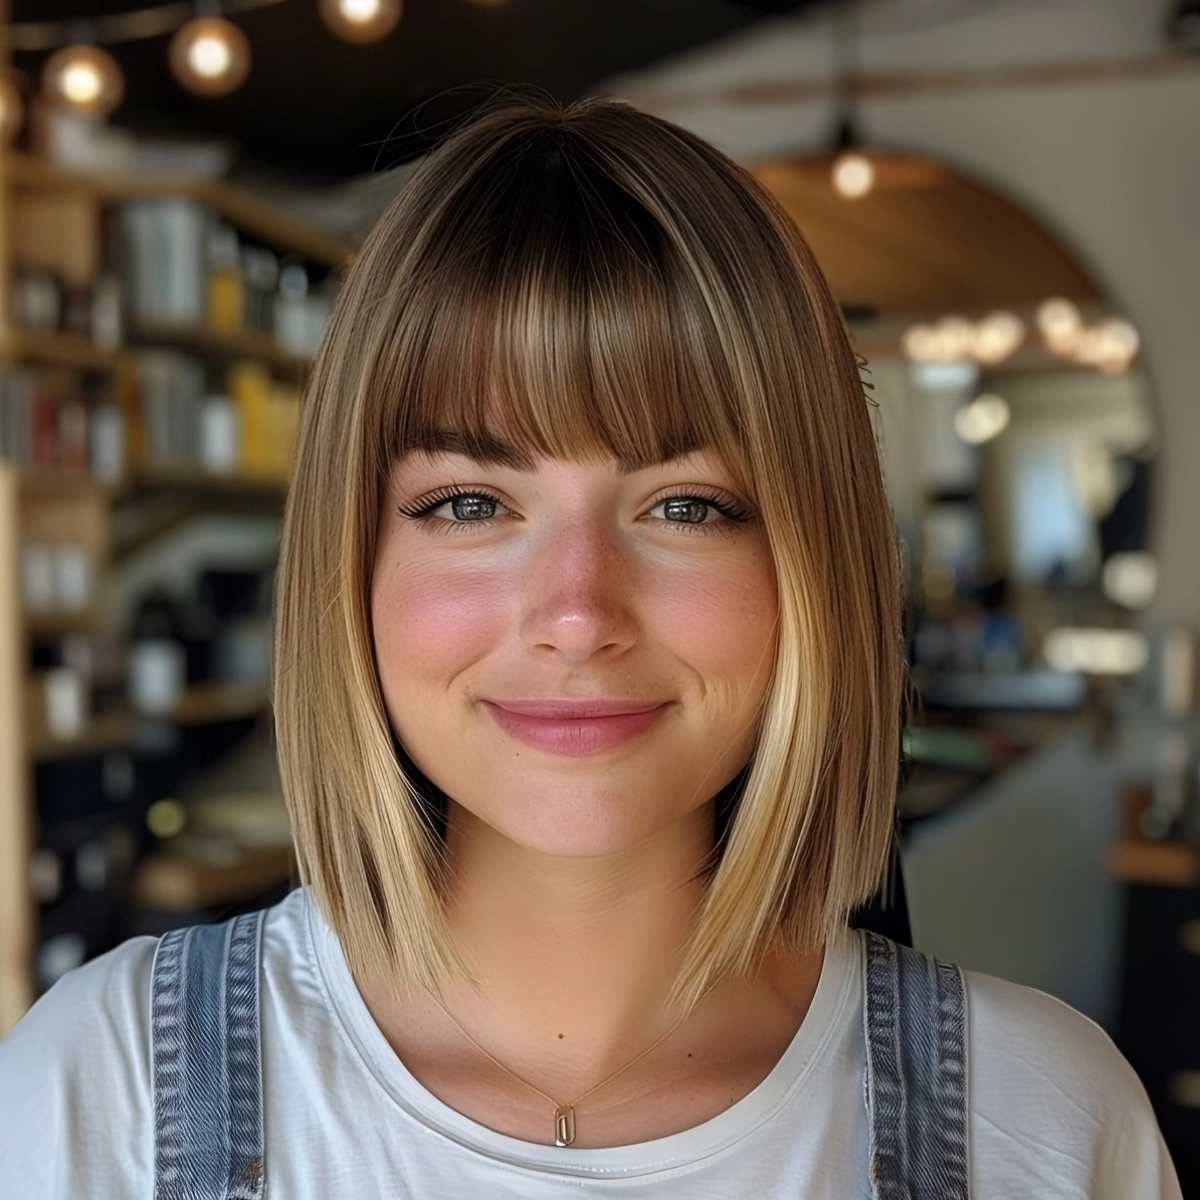 Blunt Bob with Precise Bangs Short Hairstyle for Long Faces